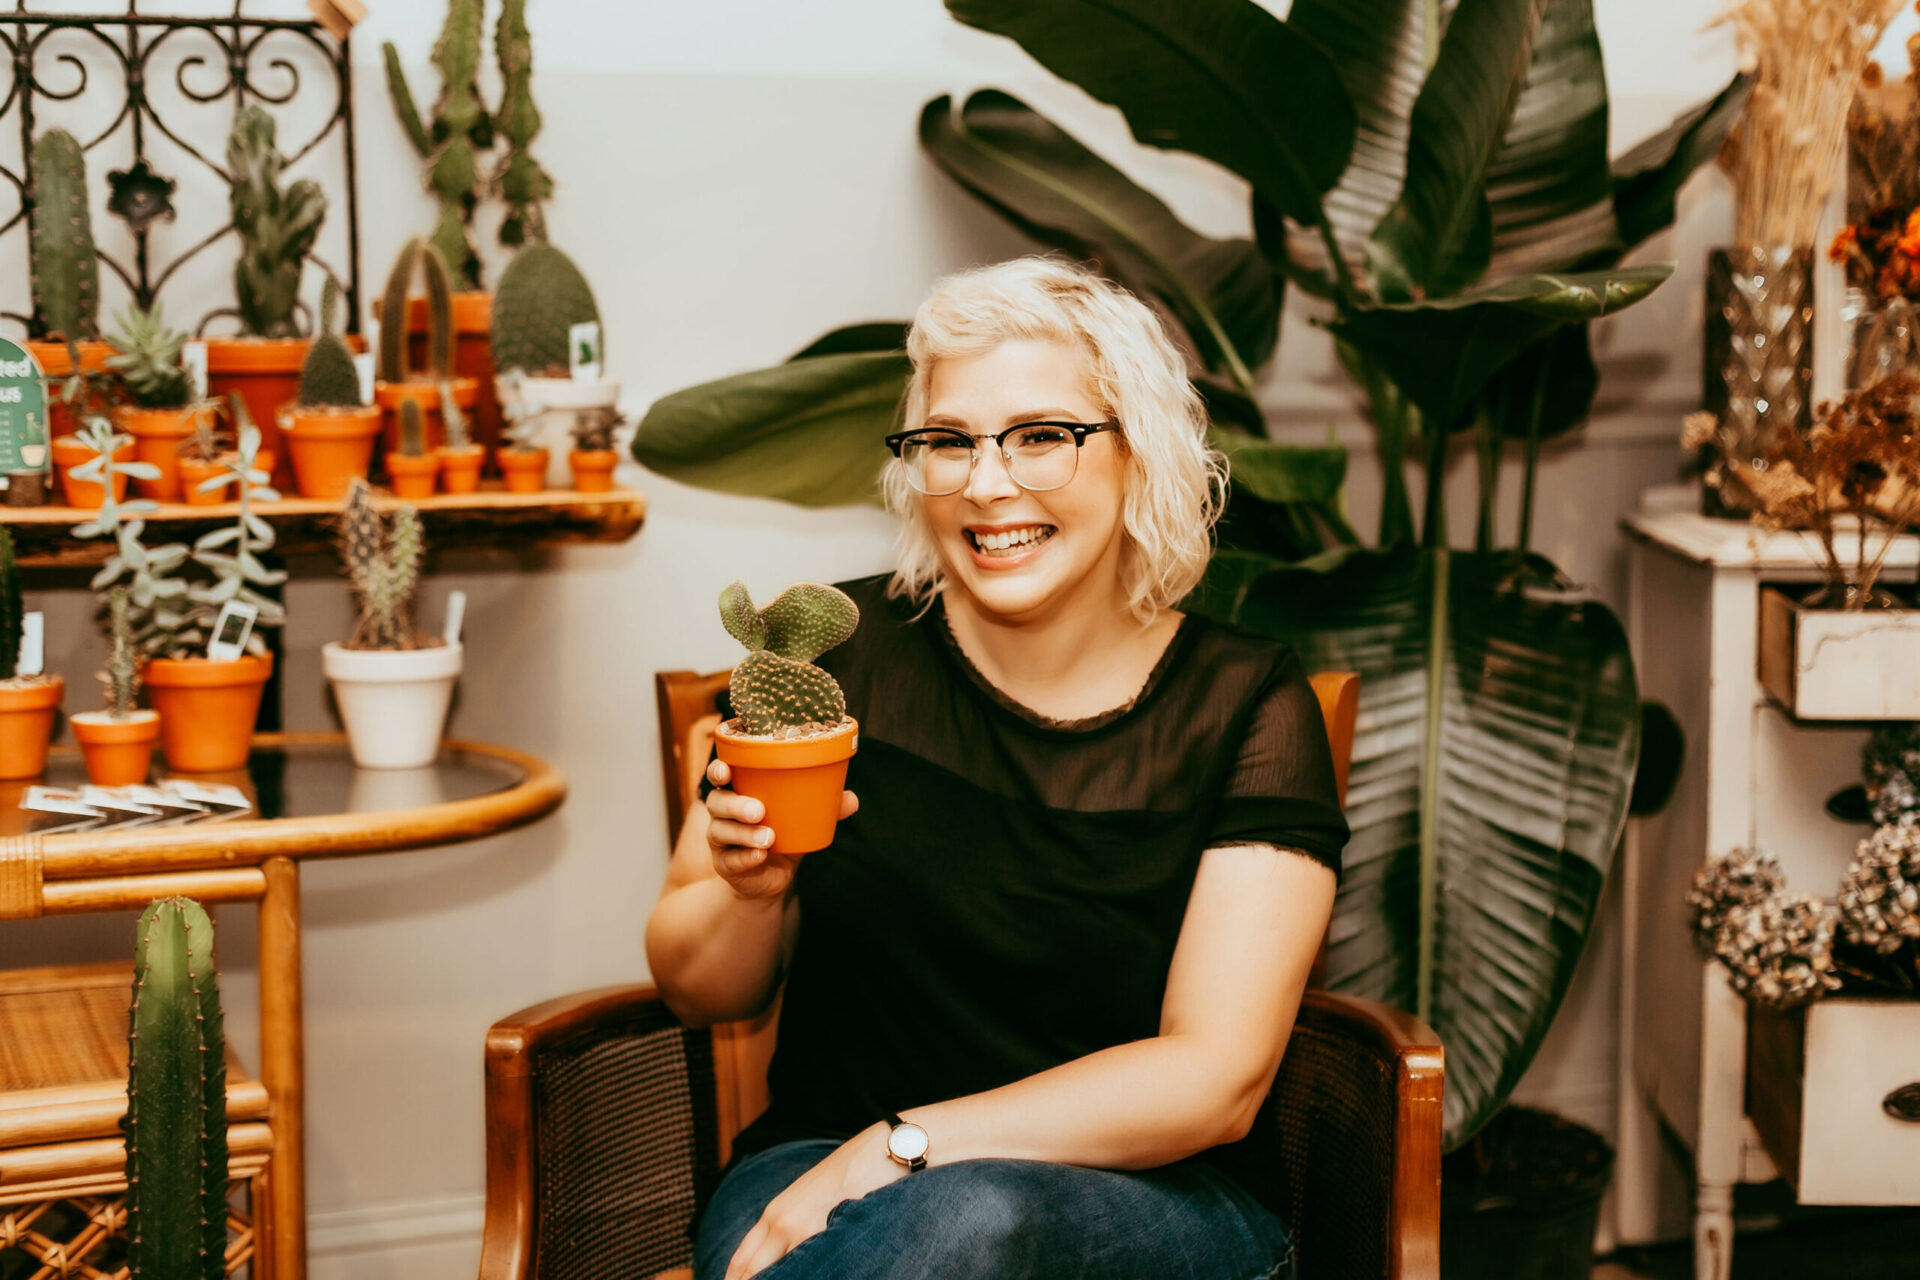 Christina, a pale white woman wearing a black top, jeans, and browline glasses sits in an armchair with wooden armrests. She is surrounded by plants, and is holding a small potted cactus and smiling.